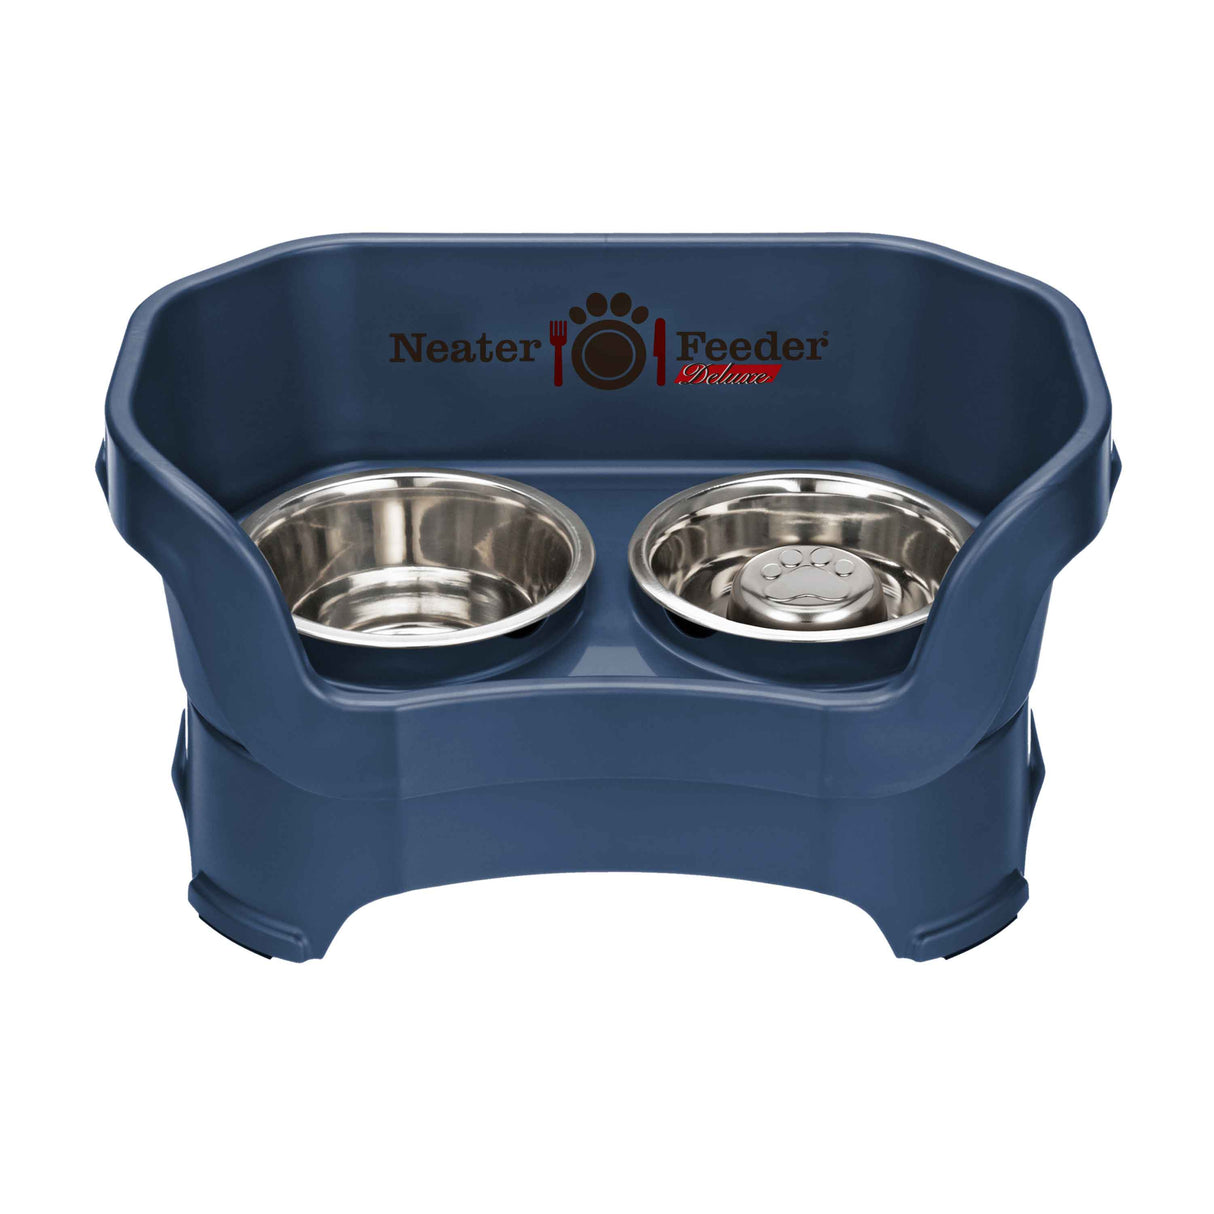 Dark Blue medium DELUXE Neater Feeder with Stainless Steel Slow Feed Bowl